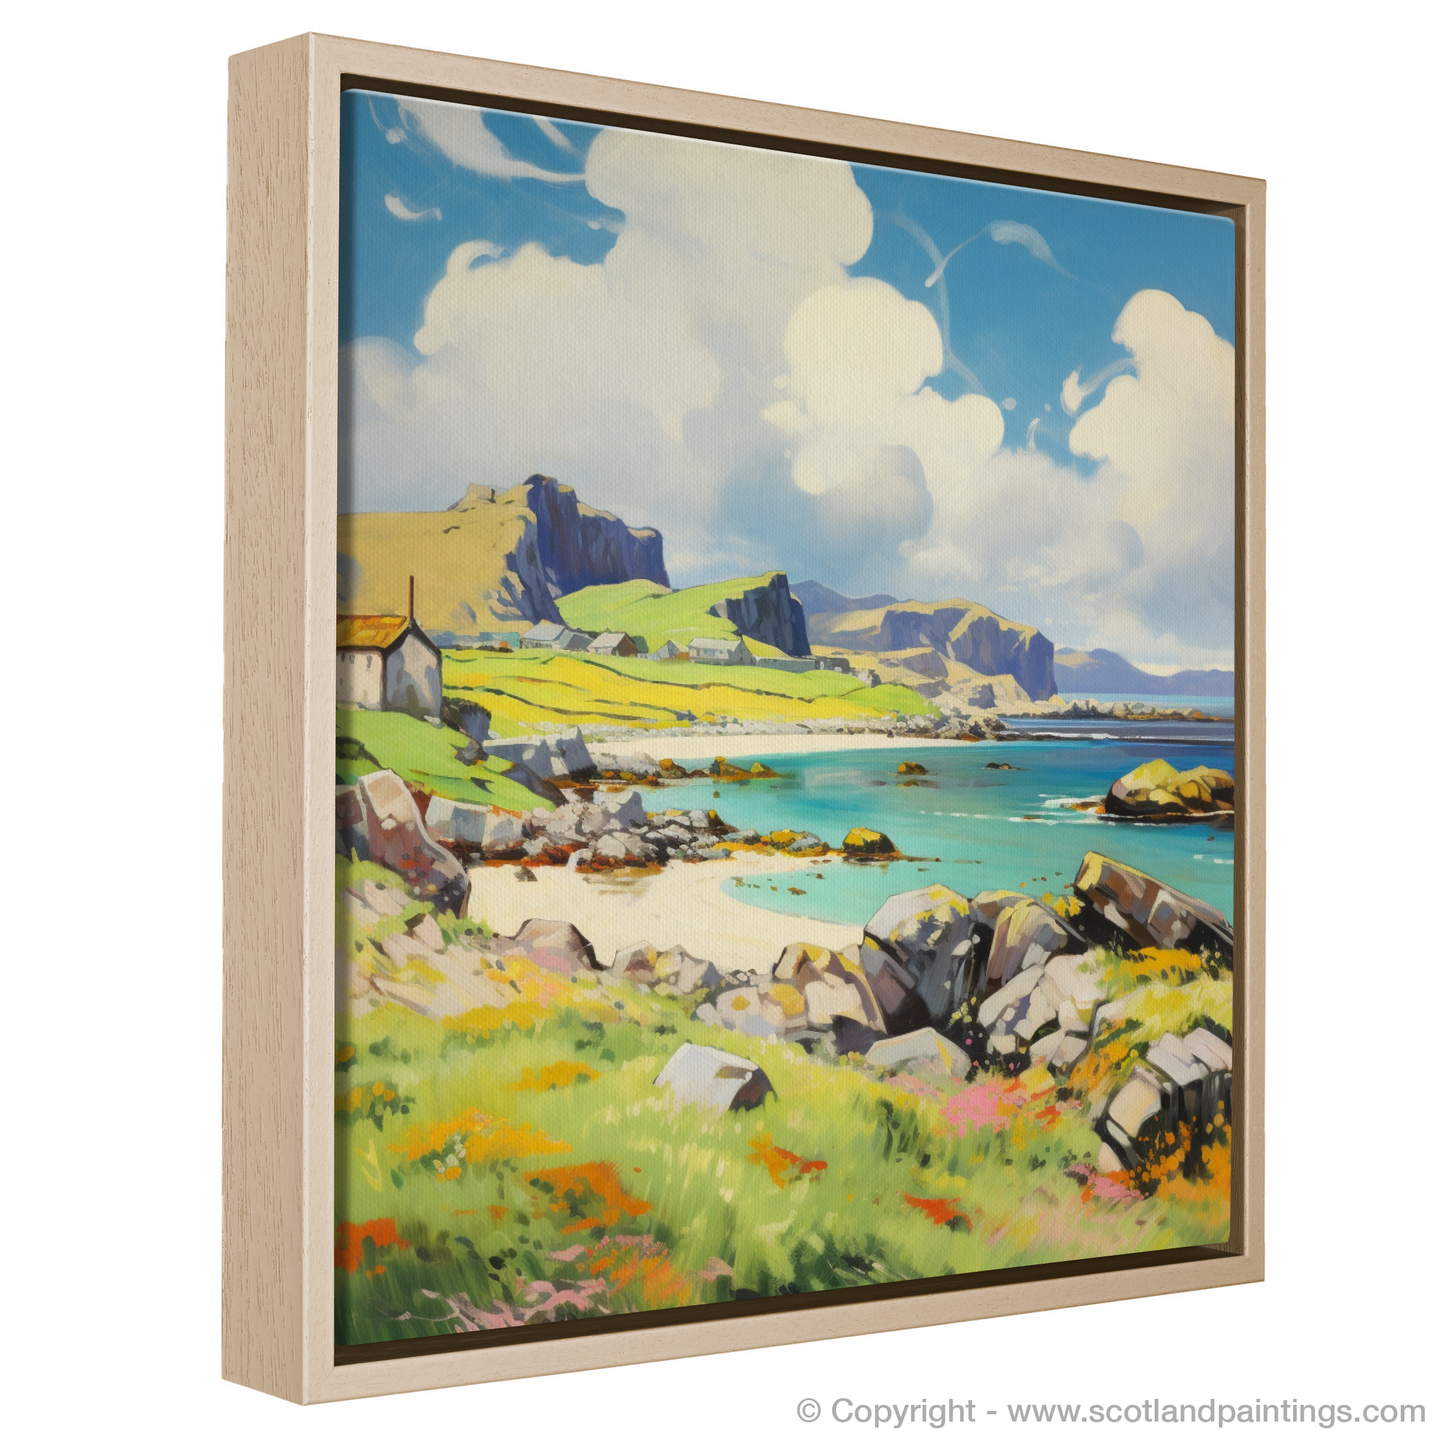 Painting and Art Print of Isle of Mull, Inner Hebrides in summer entitled "Summer Serenade: Vibrant Isle of Mull".